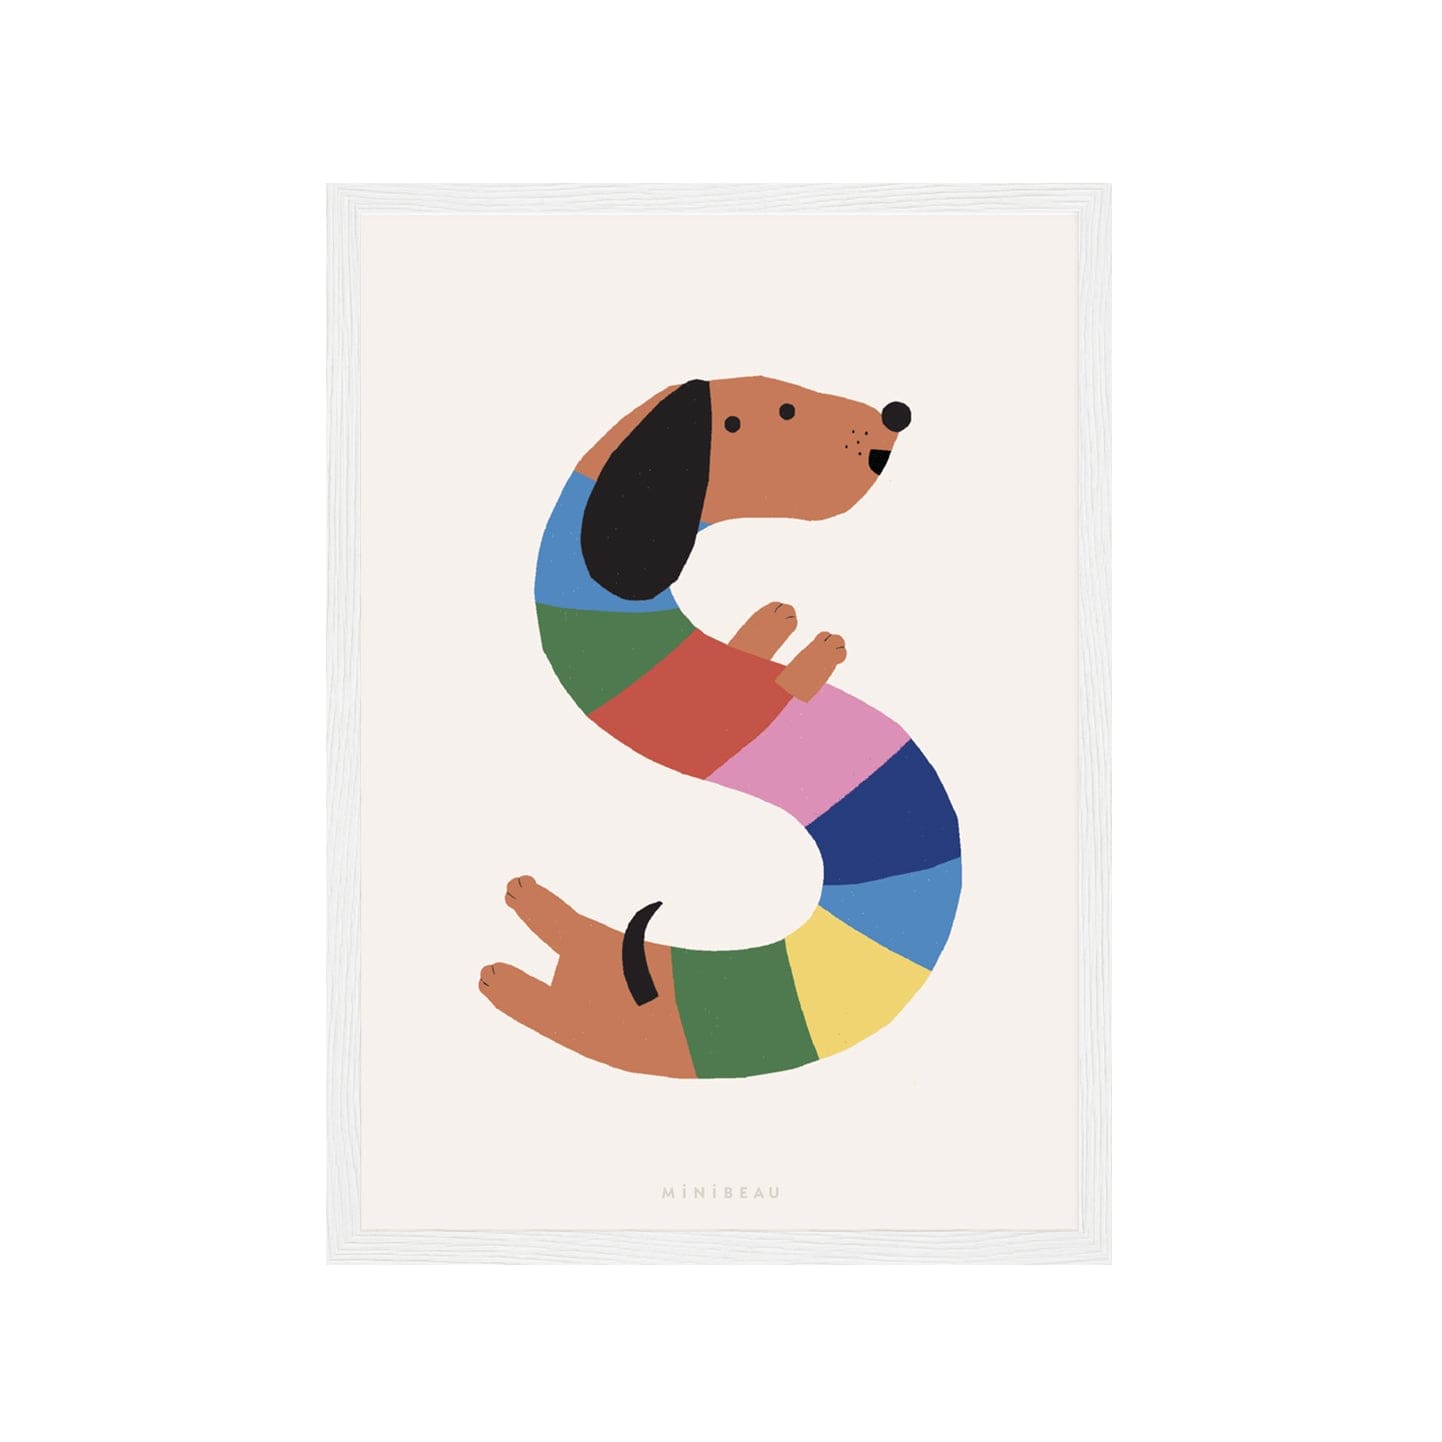 Art print in a white frame. Our Happy Alphabet 'S' Art Print shows a rainbow-striped sausage dog forming the shape of an S on a neutral background.